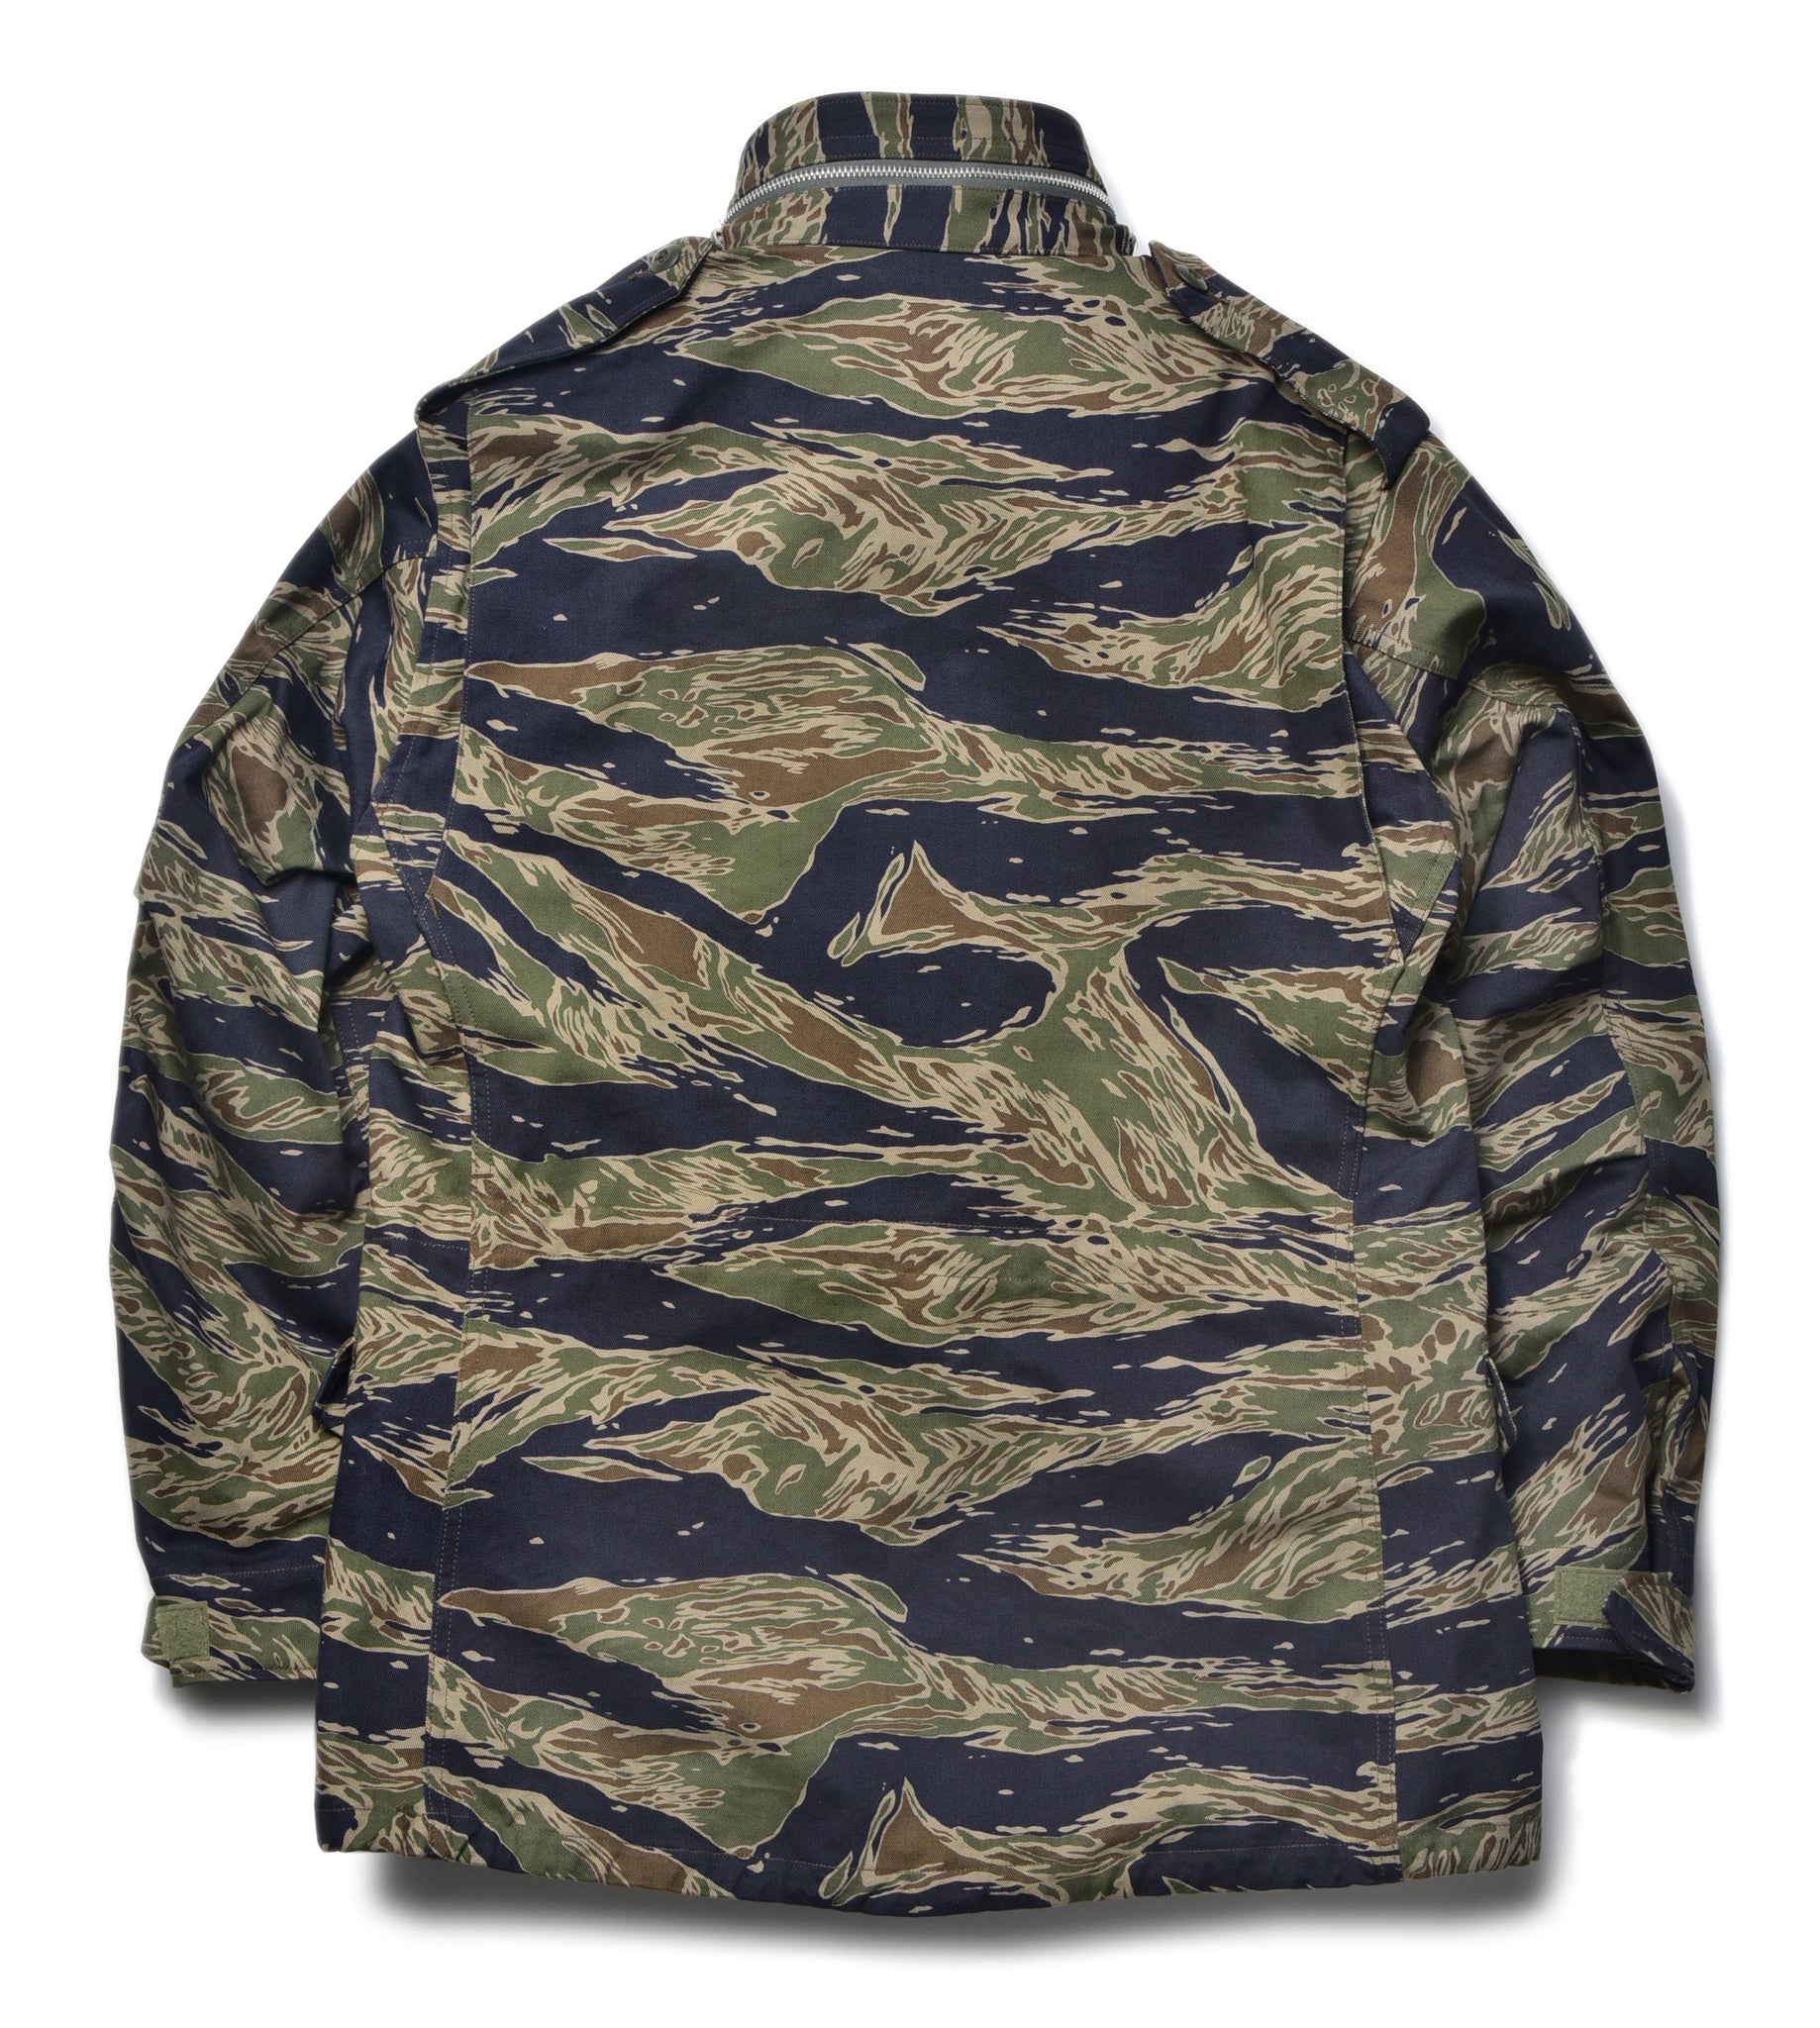 M-65 FIELD COAT / TIGER CAMOUFLAGE, TAD POLE – The Real McCoy's